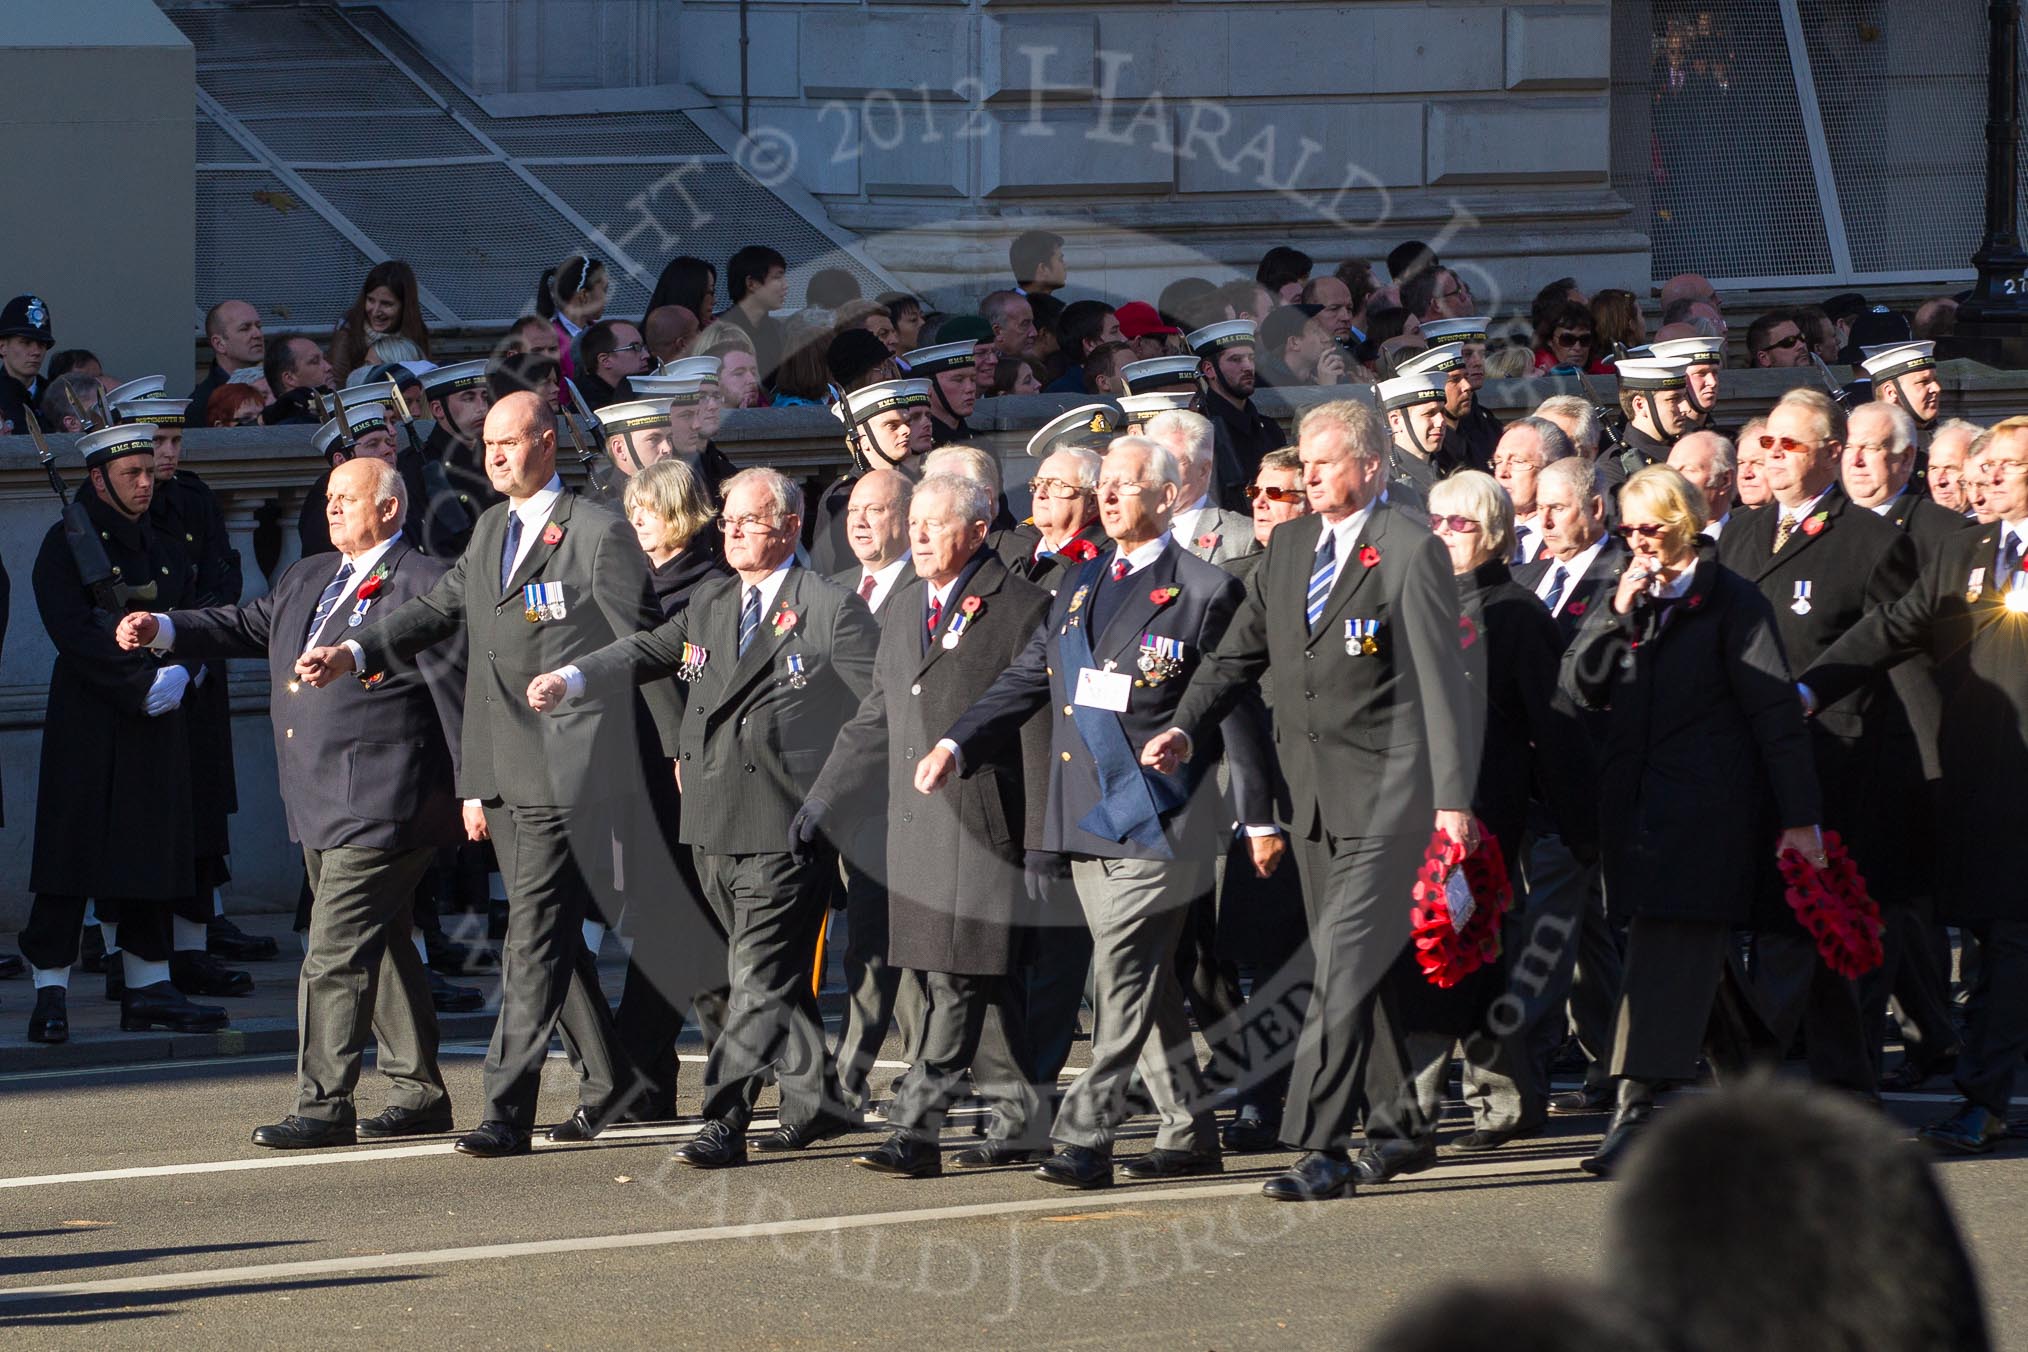 Remembrance Sunday 2012 Cenotaph March Past: Group M12 - National Association of Retired Police Officers..
Whitehall, Cenotaph,
London SW1,

United Kingdom,
on 11 November 2012 at 12:10, image #1498